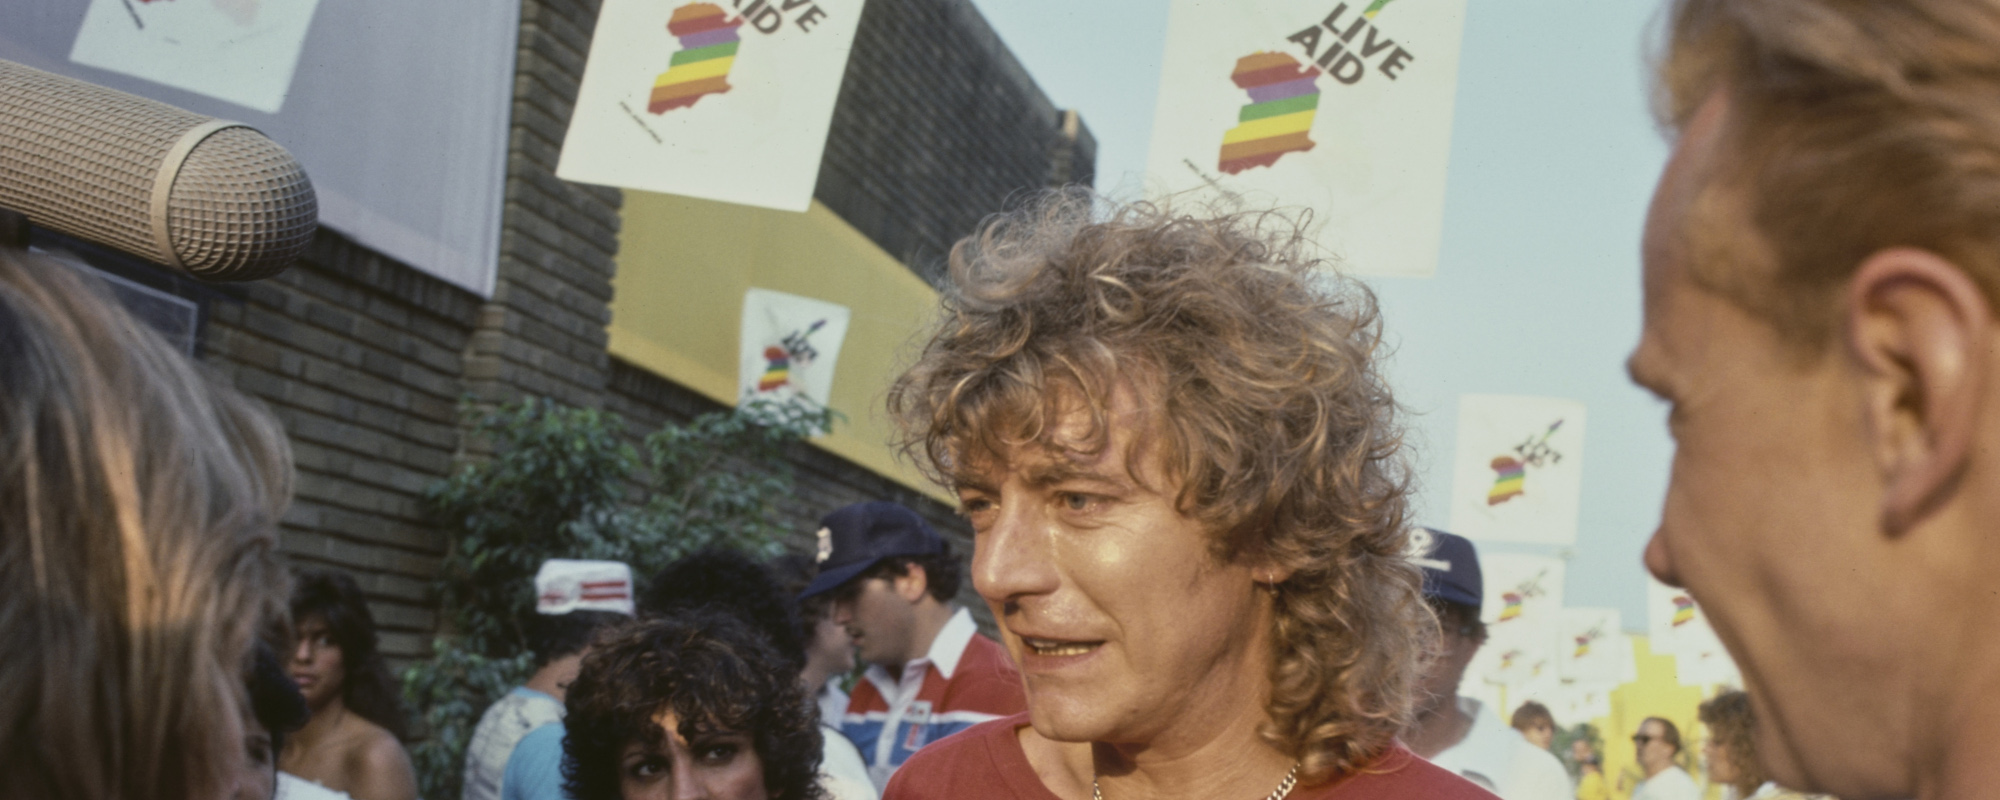 Remember When Led Zeppelin Haphazardly Reunited at Live Aid